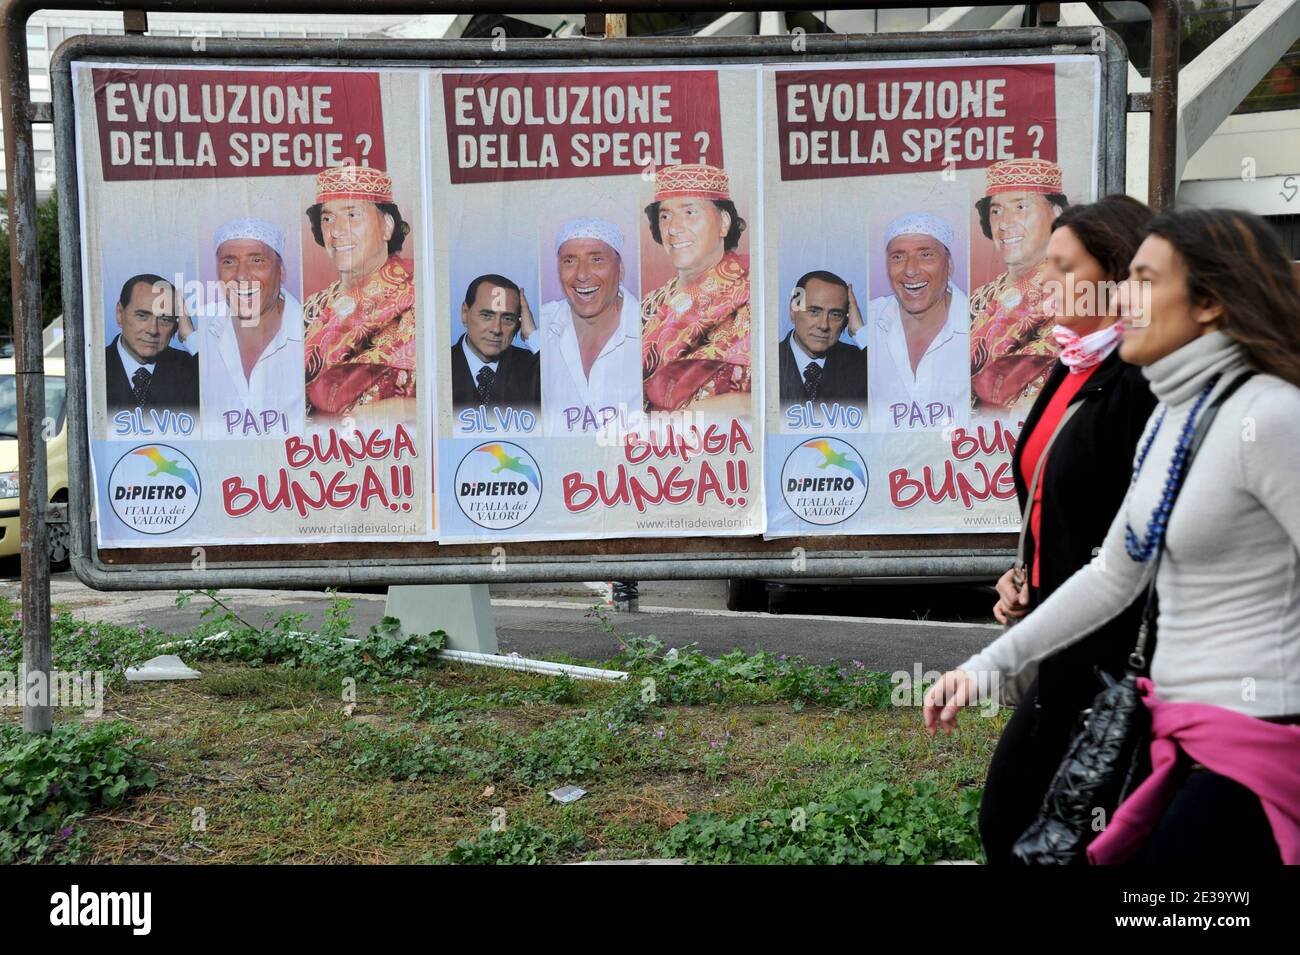 'Hundred of posters showing a ridiculous Silvio Berlusconi are invading in Rome, Italy, on October 30,2010. Writen : ' The evolution of the human race: Silvio, Papi, Bunga Bunga'. A high-profile Silvio Berlusconi political appointment has been drawn into a prostitution investigation involving a teenage Moroccan belly dancer. Prime Minister Silvio Berlusconi said he loved life and women and would not apologise for enjoying himself after new reports of young women and parties were splashed across the front pages. Italian newspapers have reported that a 17 year-old Moroccan girl, Karima El Mahrou Stock Photo